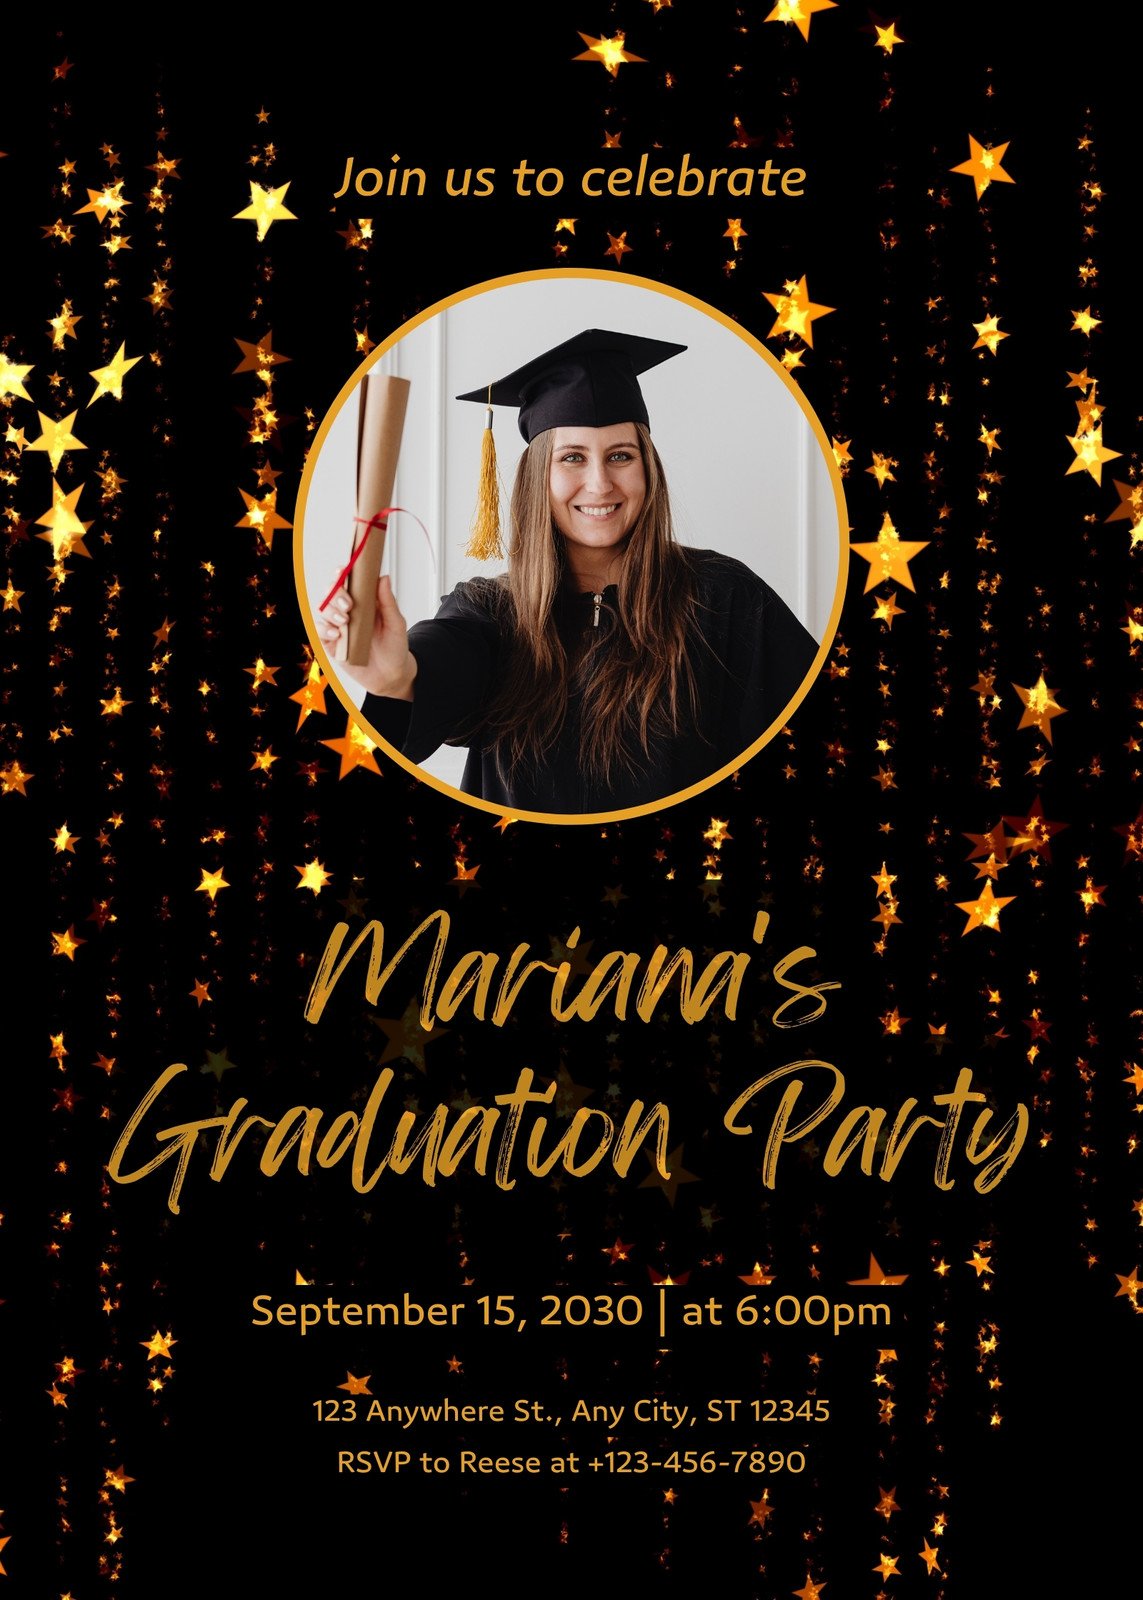 Black and Gold Graduation Party Ideas - Celebrations at Home